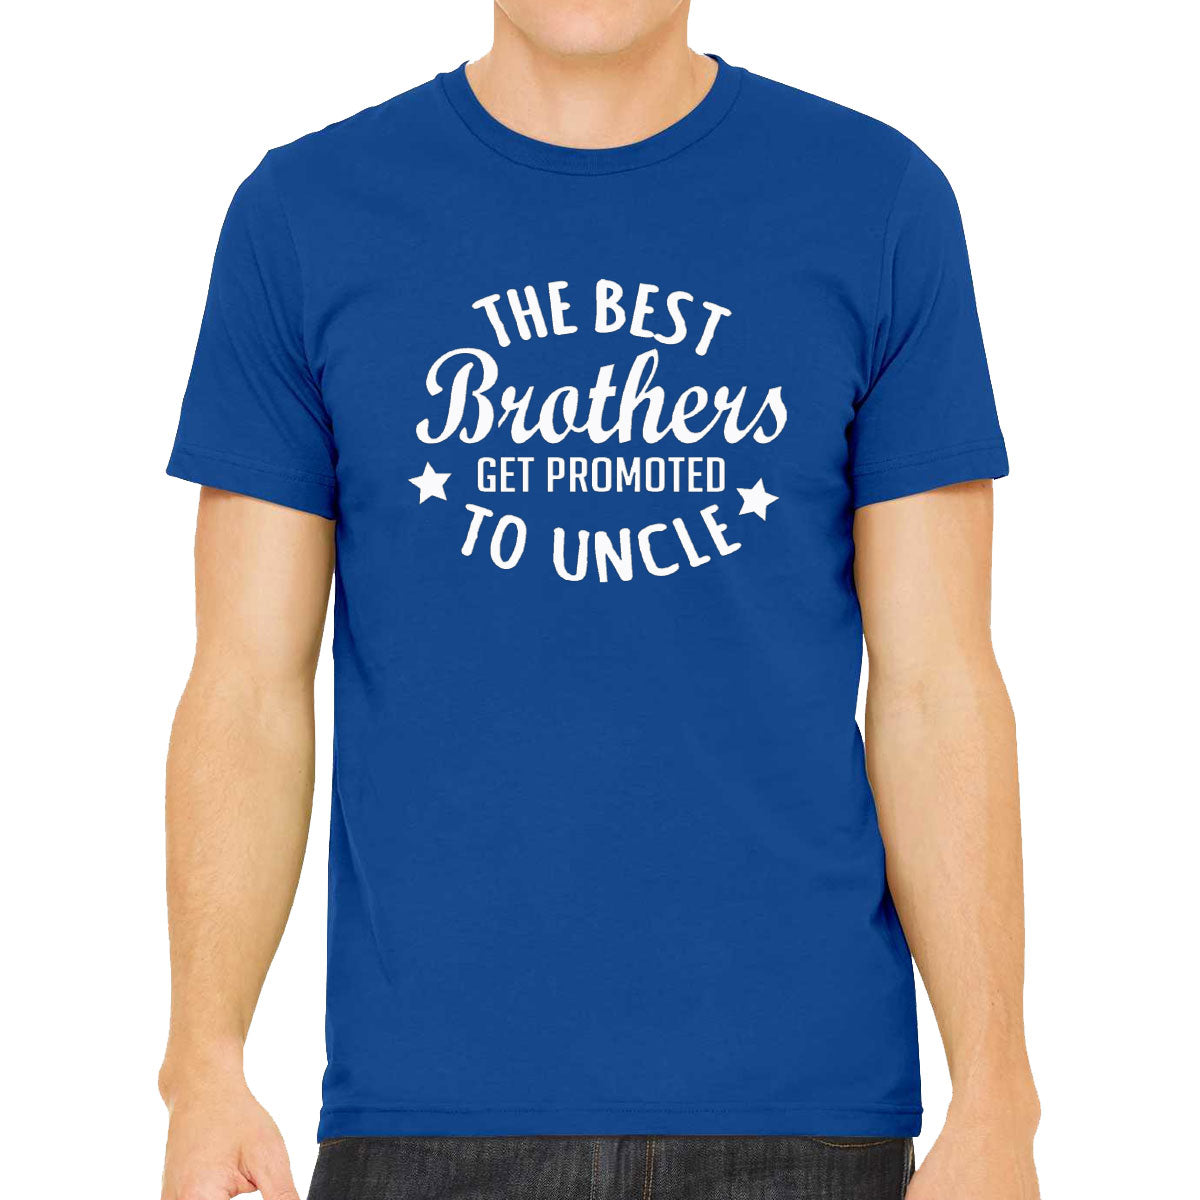 The Best Brothers Get Promoted To Uncle Men's T-shirt